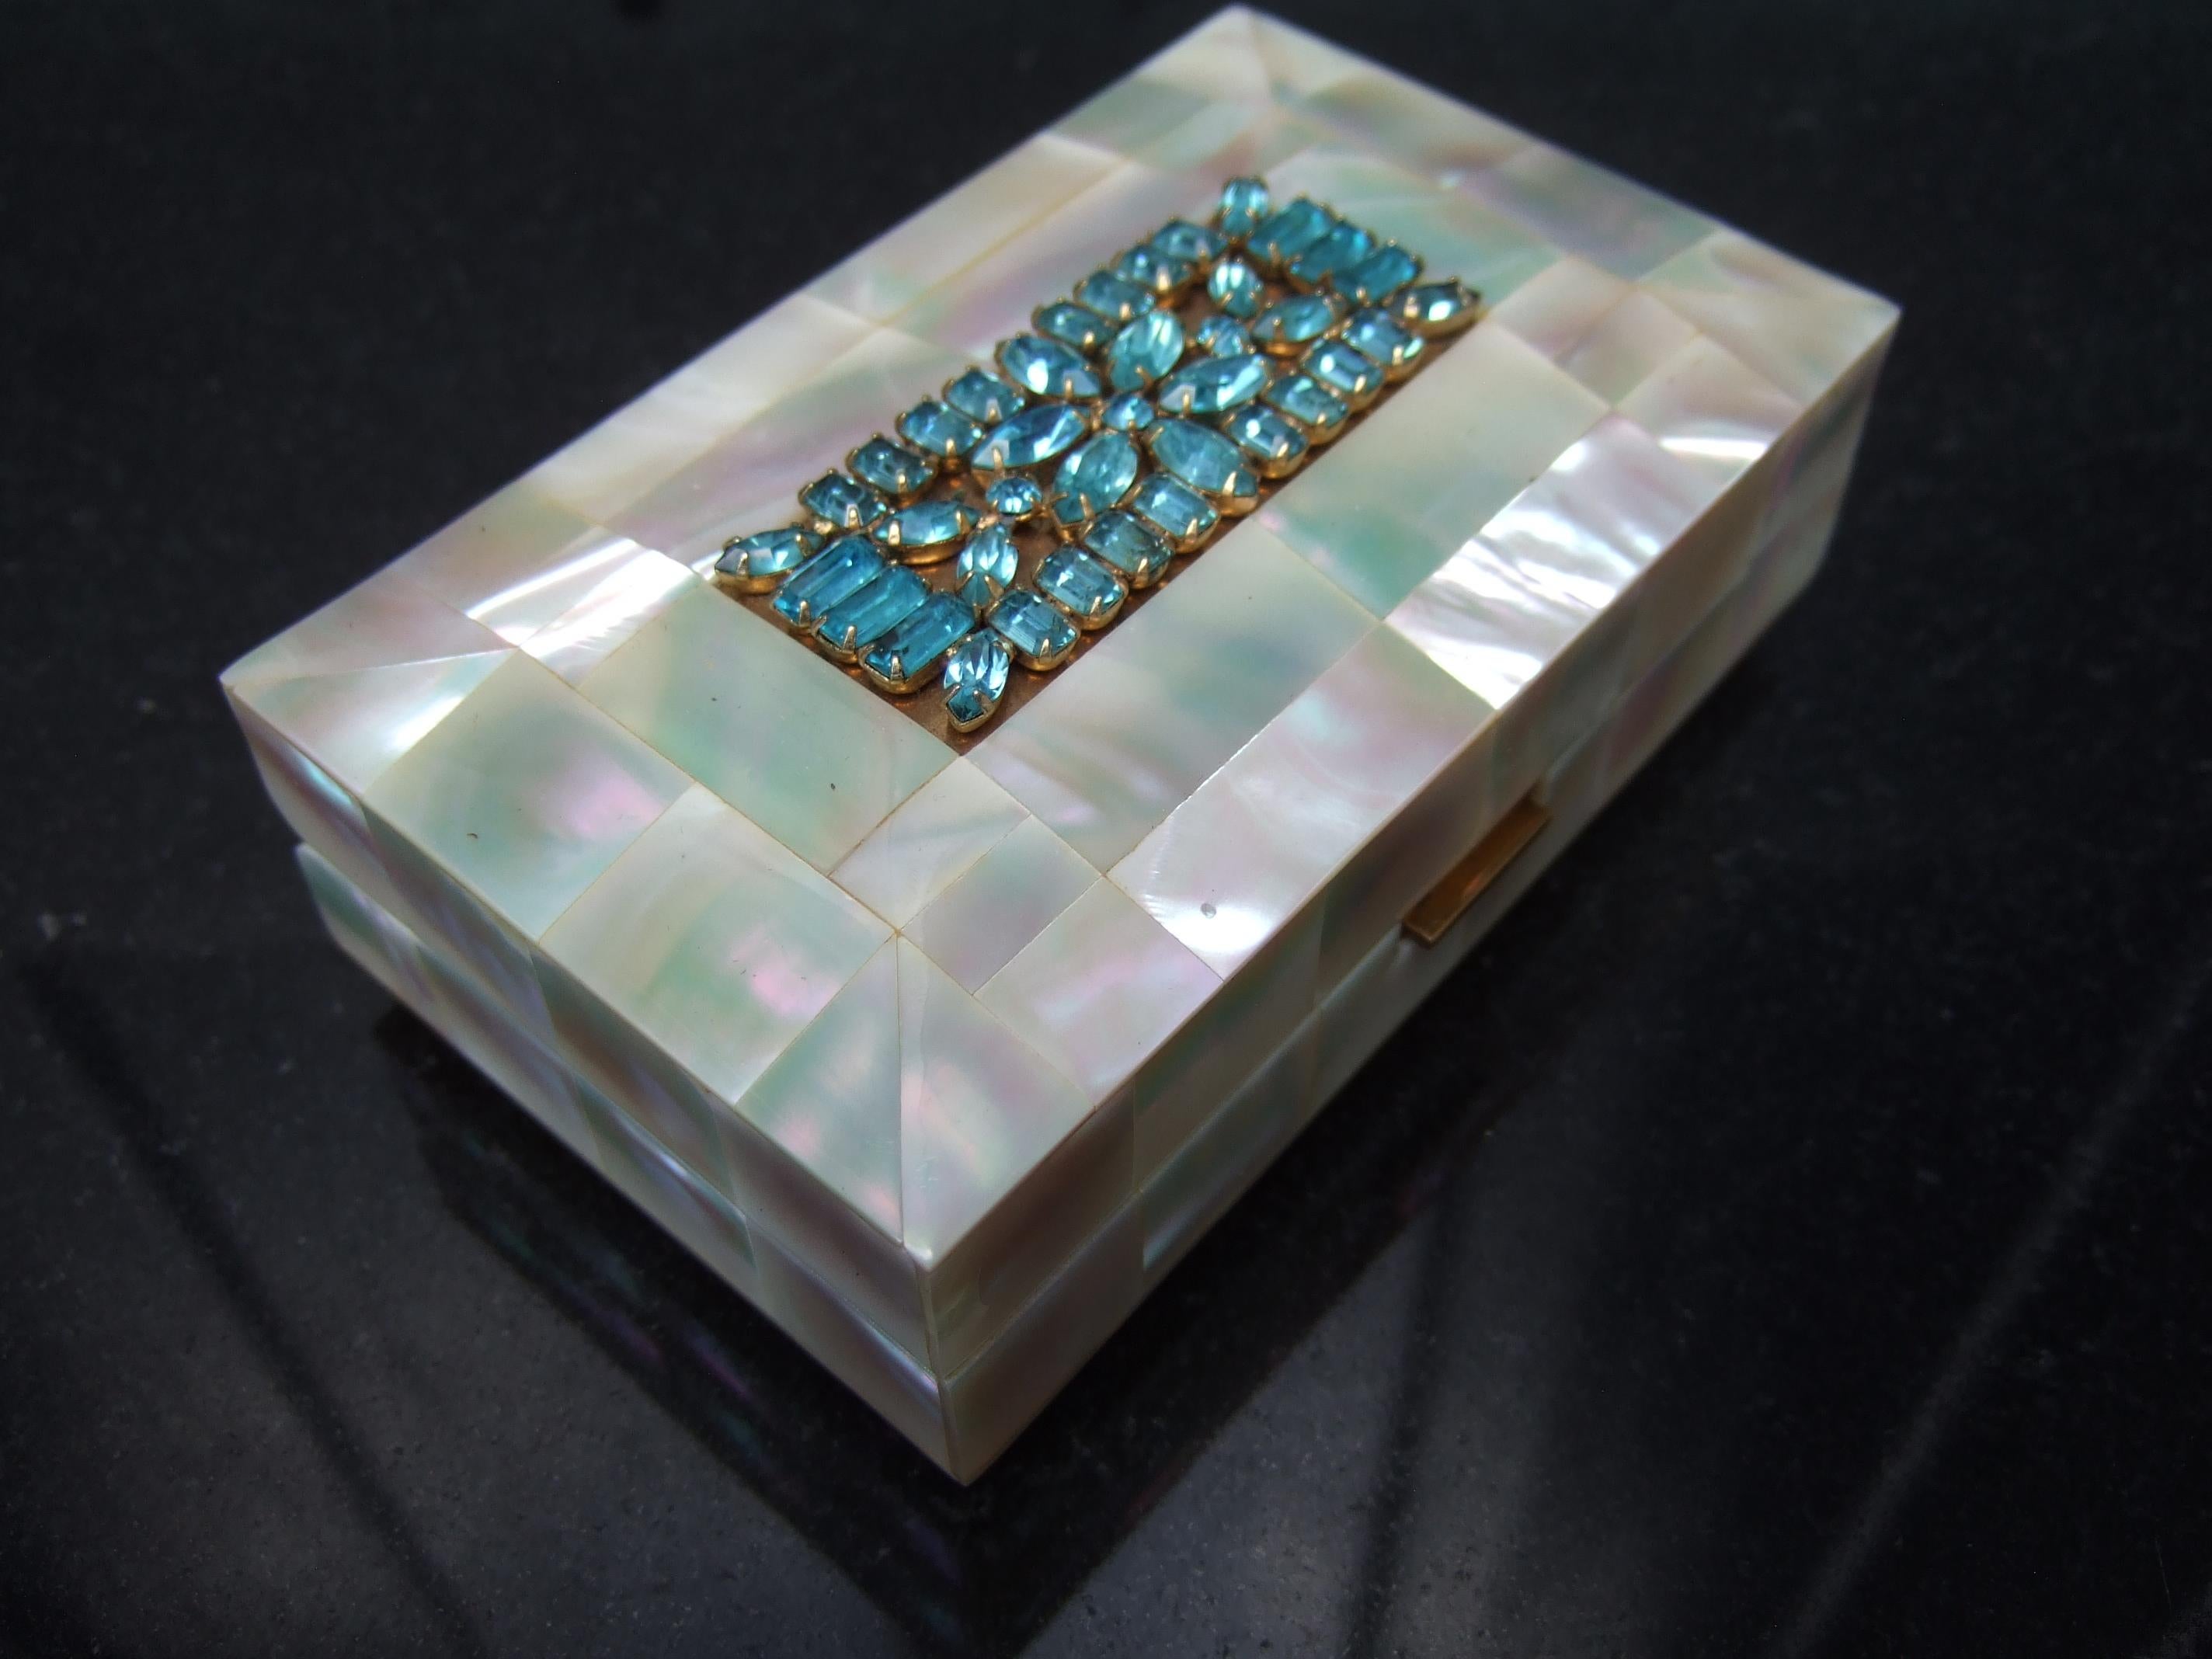 Opulent Mother of Pearl Crystal Encrusted Compact Evening Bag by Elgin c 1950s In Good Condition For Sale In University City, MO